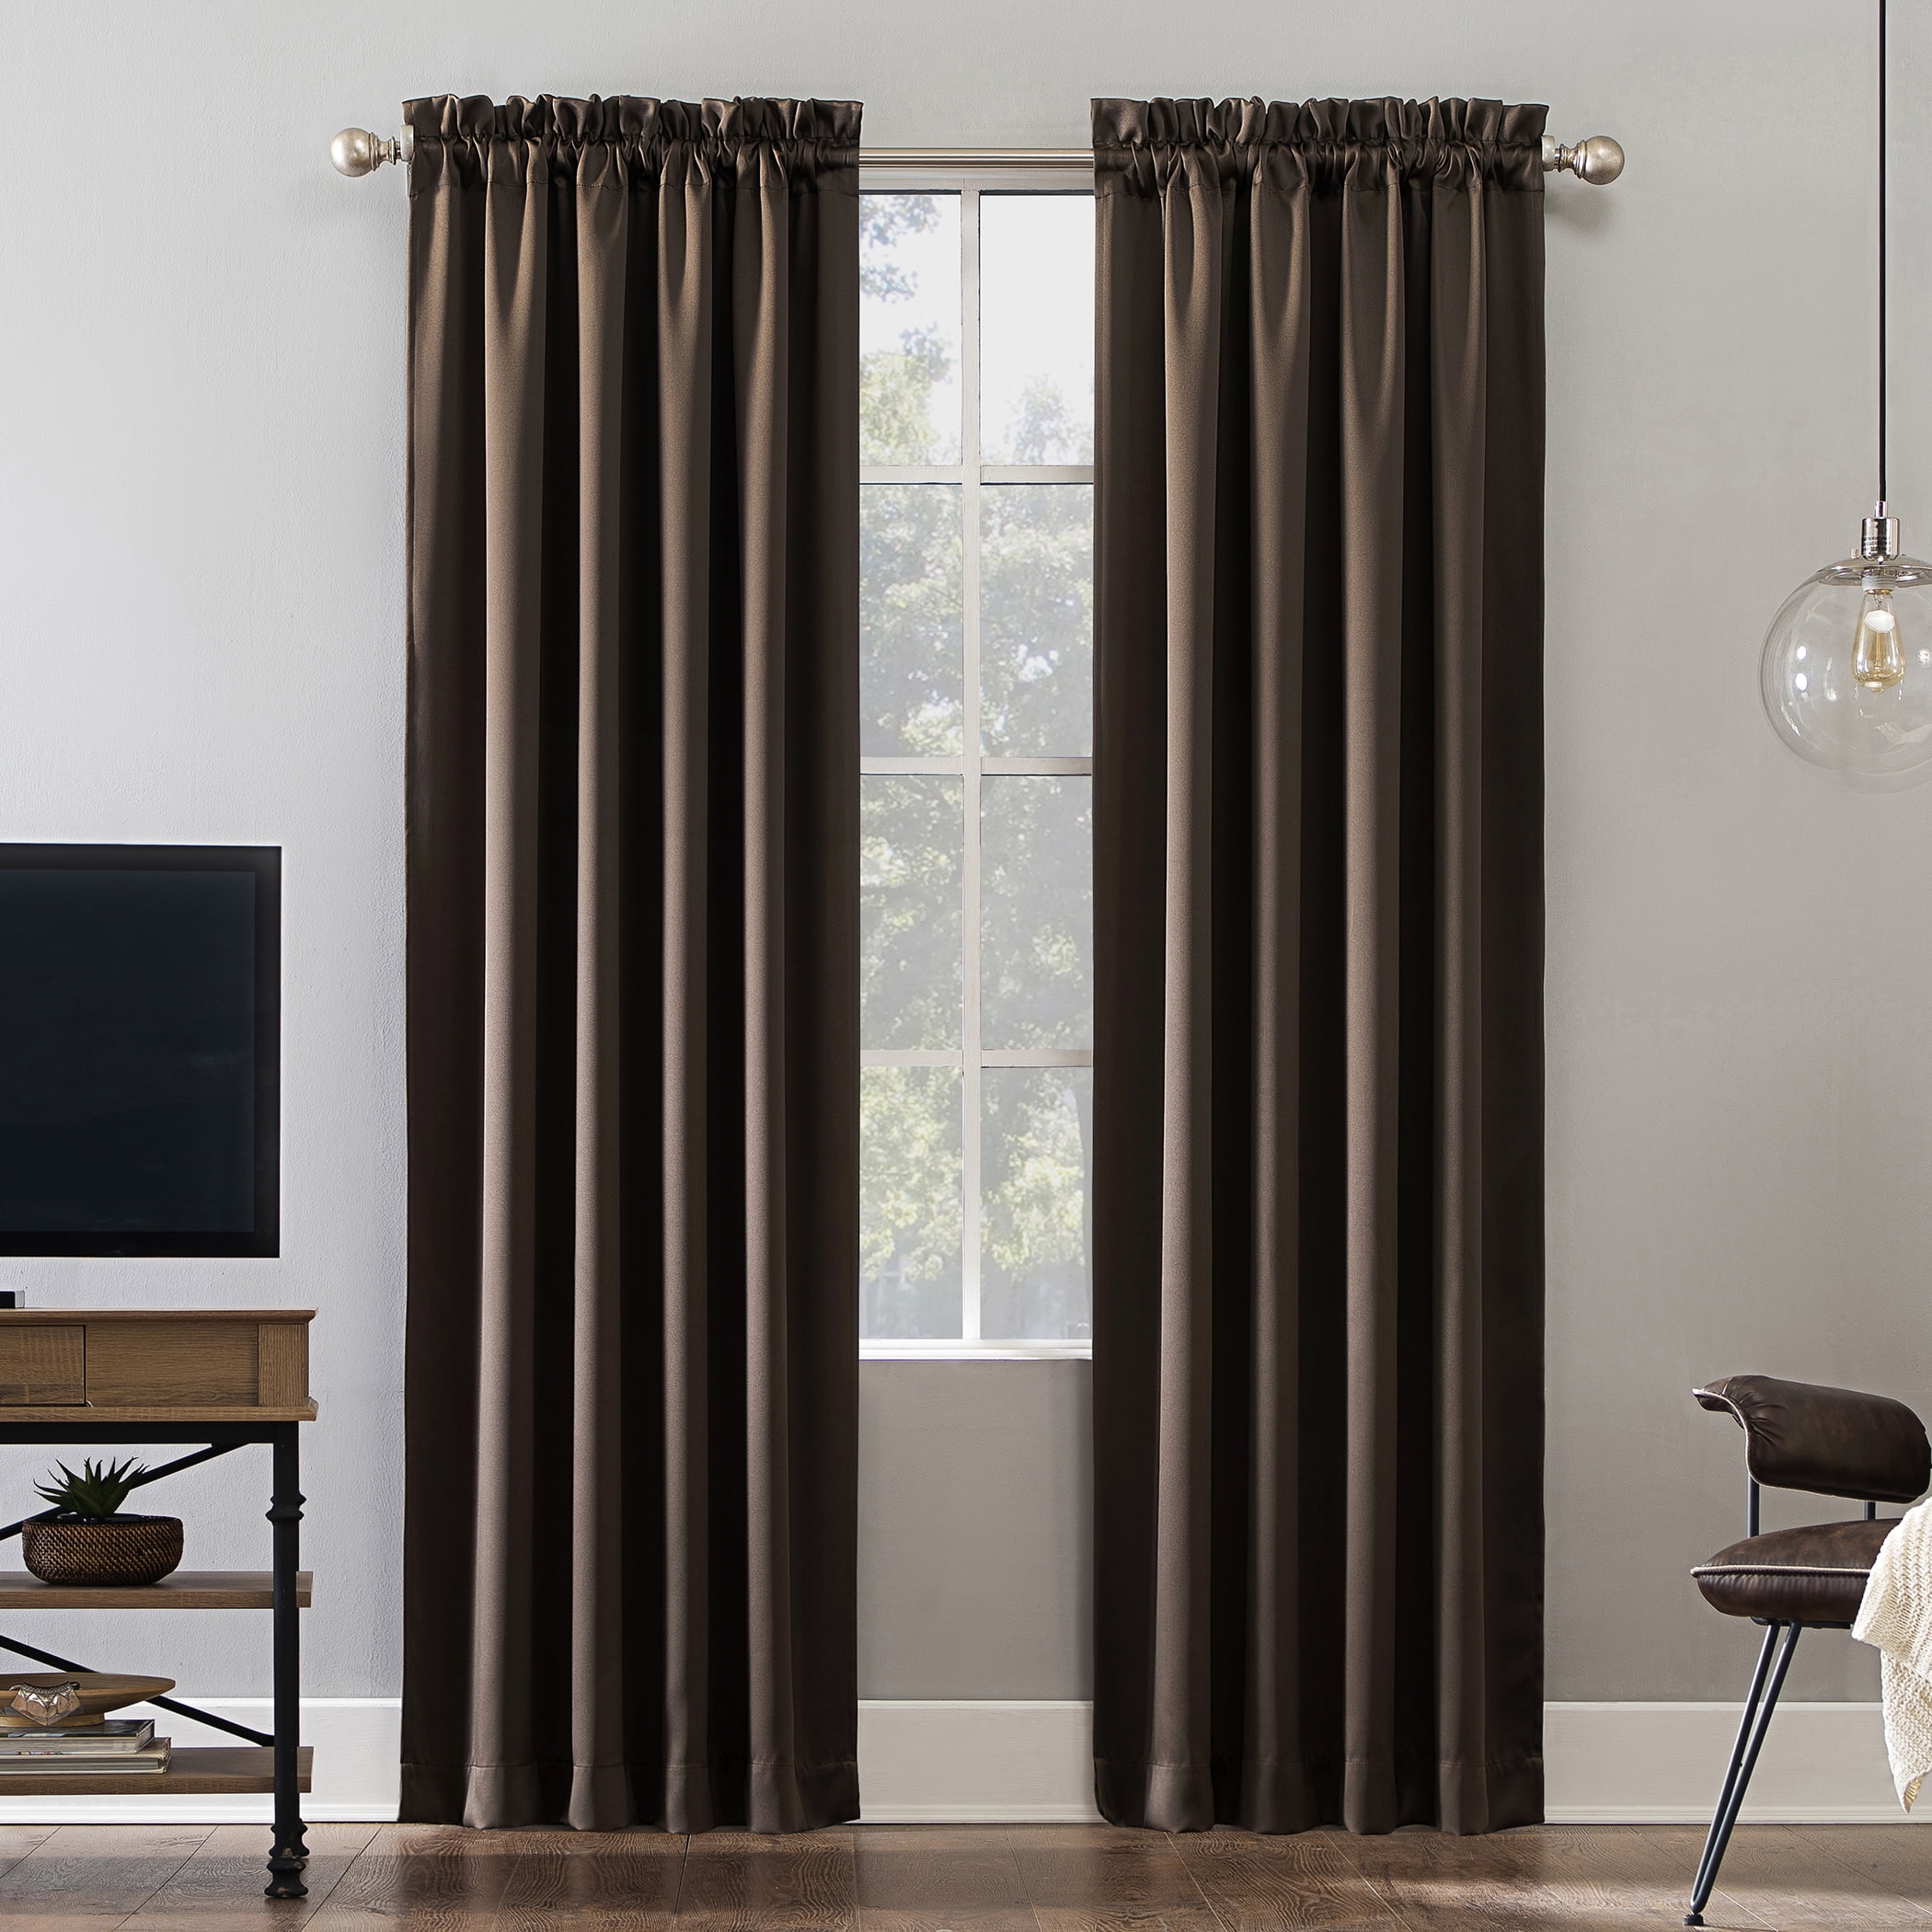 SET 2 PANELS SOLID BLACKOUT THERMAL INSULATED ROD POCKET WINDOW CURTAIN DRAPE 